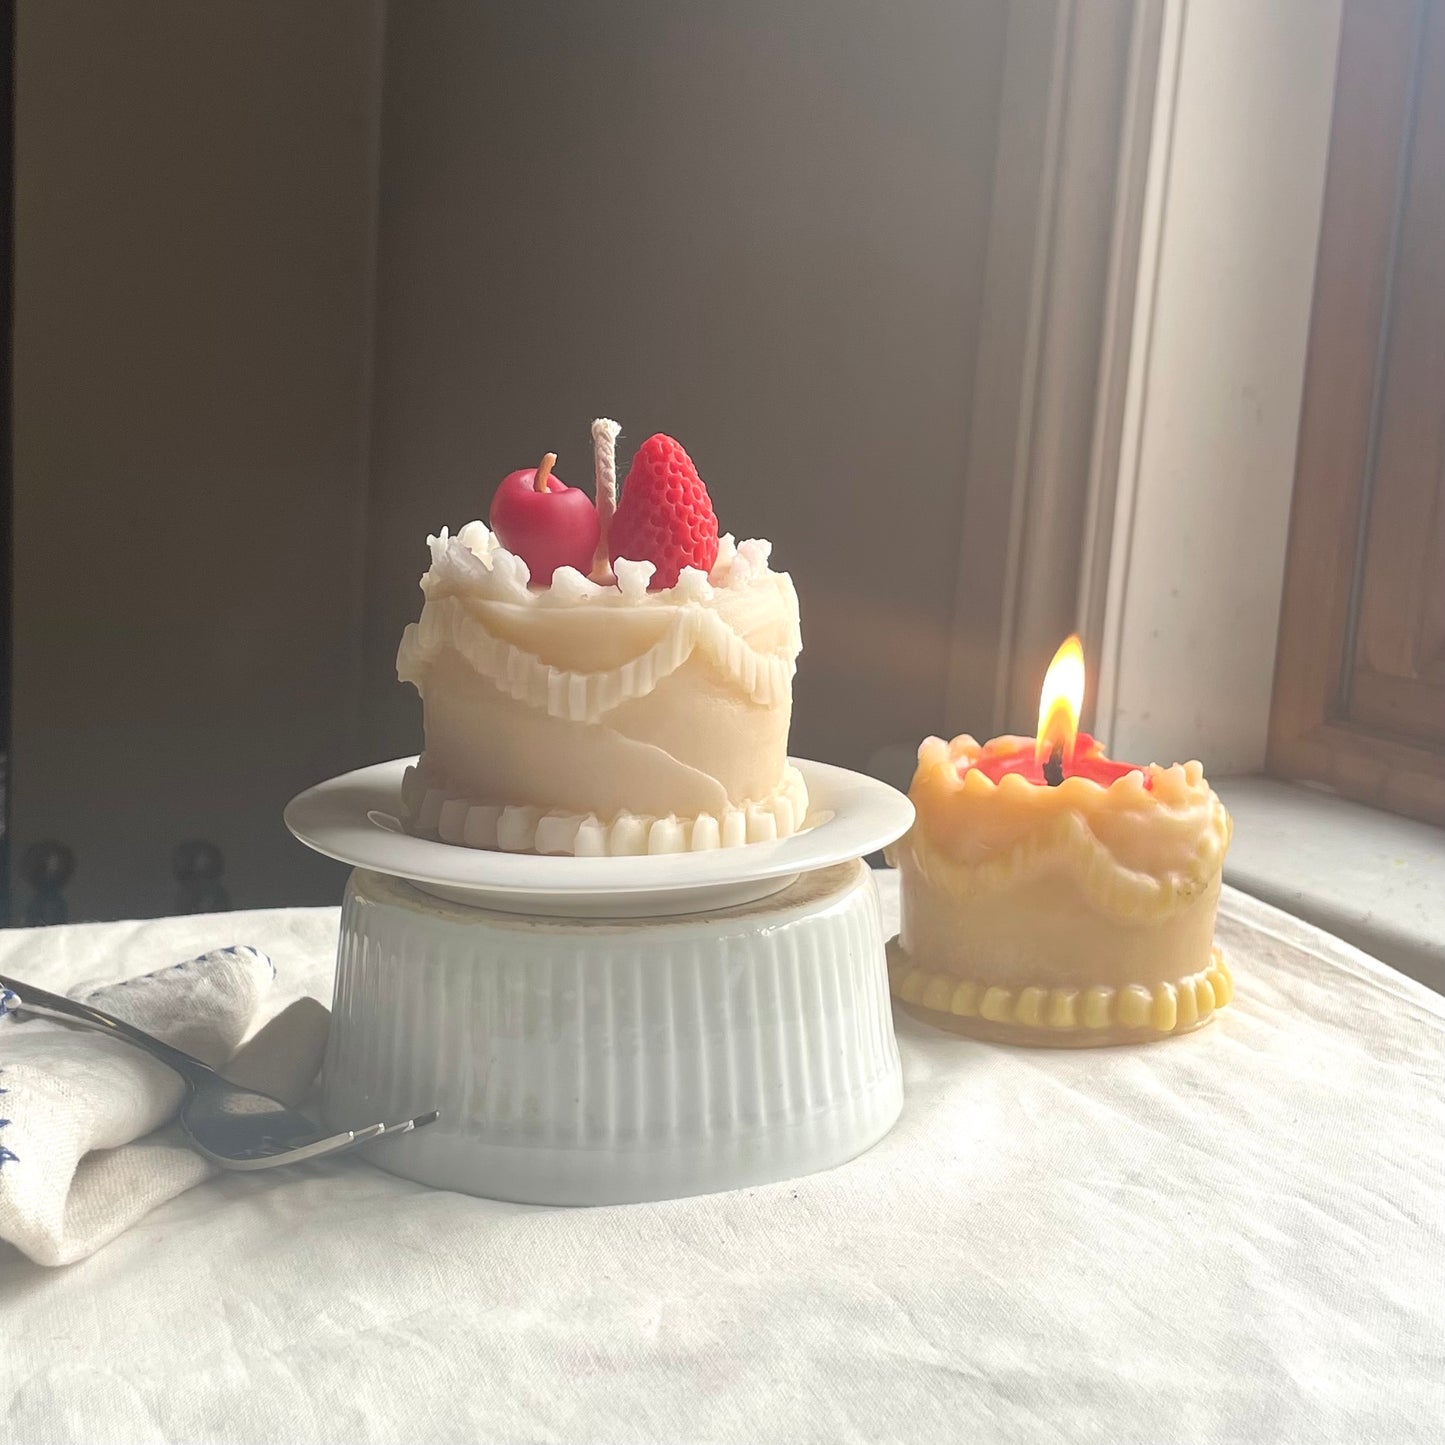 Cake Candle with Fruit in 100% beeswax - Birthday Cake Candle - Strawberry and Cherry